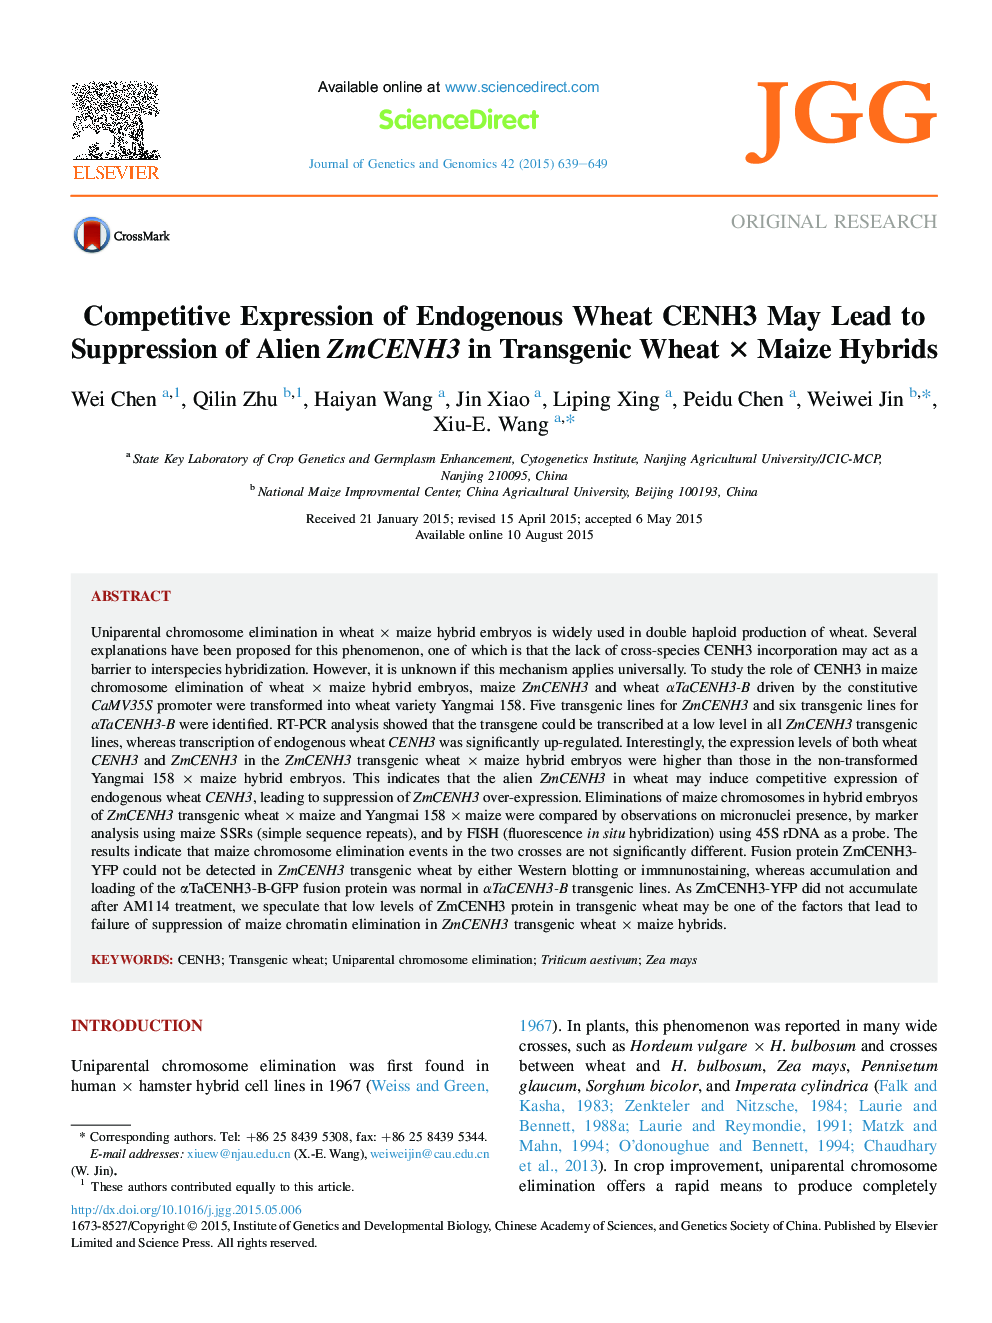 Competitive Expression of Endogenous Wheat CENH3 May Lead to Suppression of Alien ZmCENH3 in Transgenic Wheat × Maize Hybrids